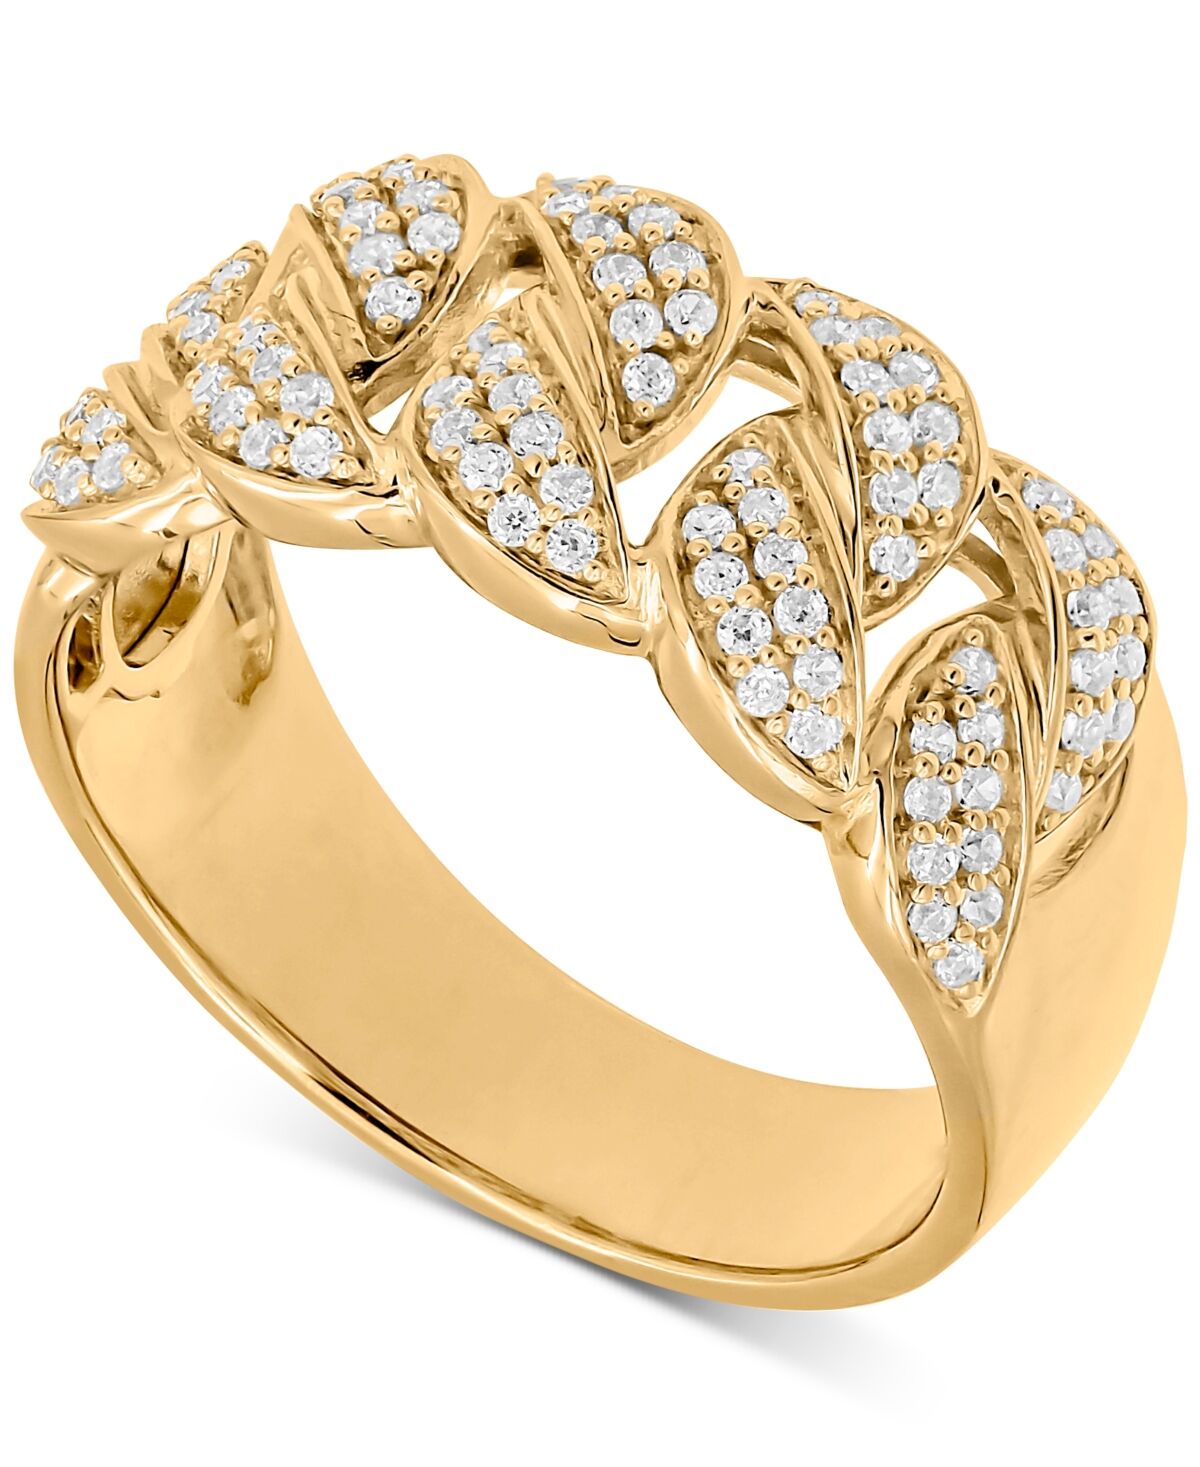 Macy's Men's Diamond Chain Link Ring (1/2 ct. t.w.) in 10k White Gold (Also in Yellow Gold) - Yellow Gold